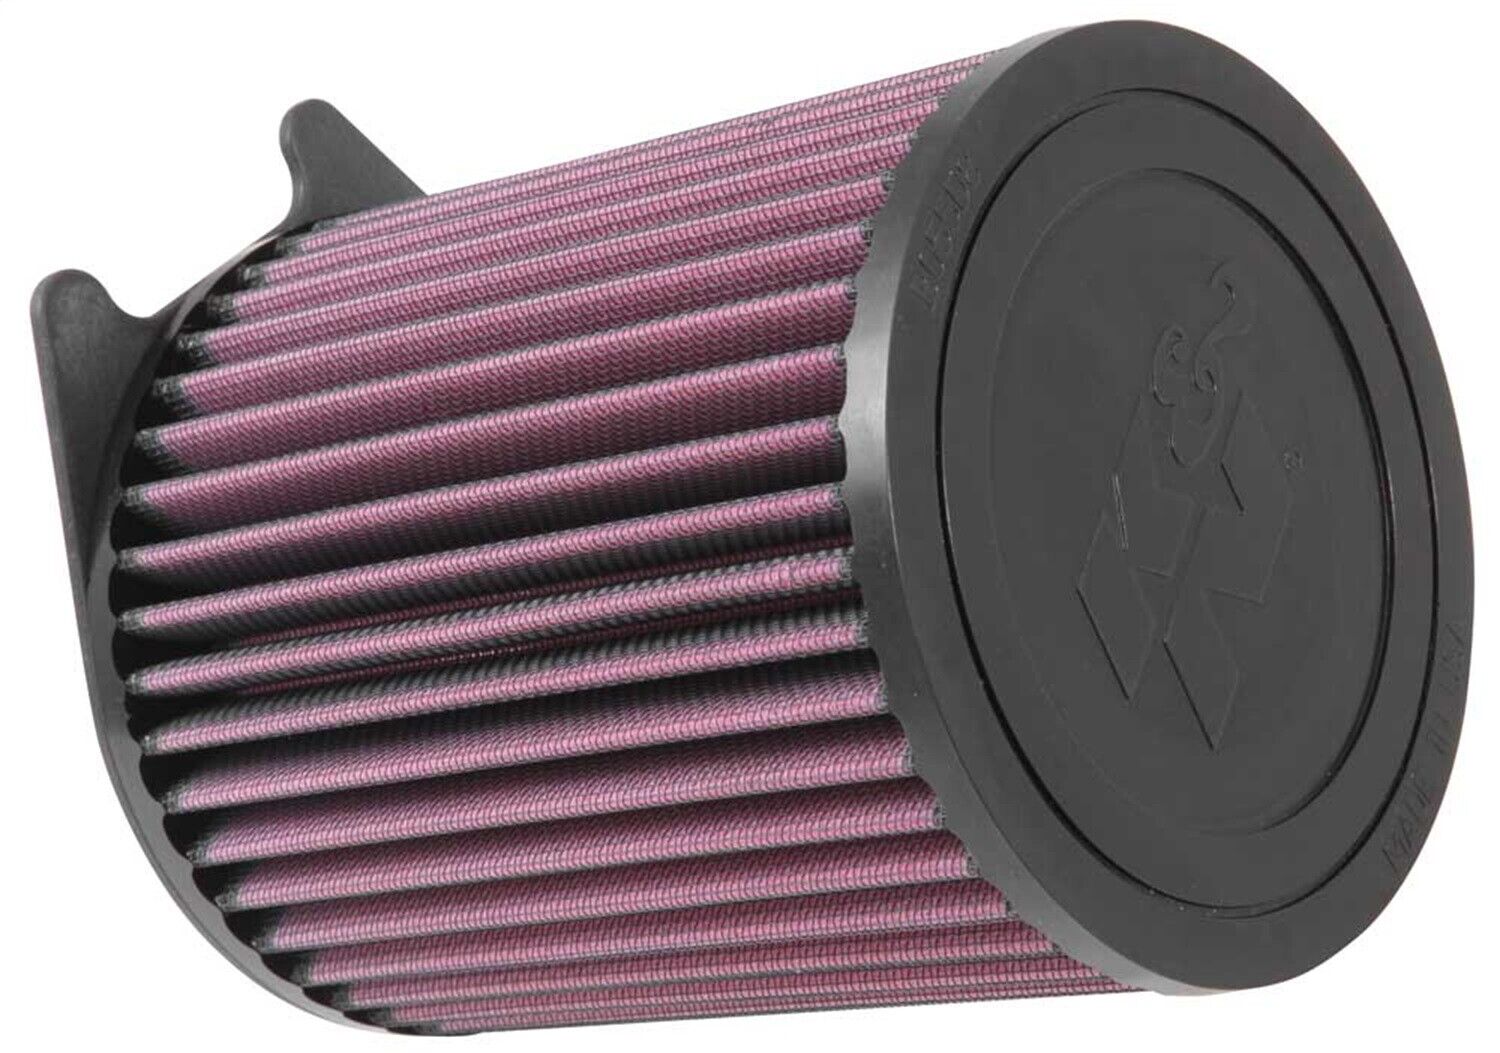 K&N Filters E-0661 Air Filter Fits 14-19 A45 AMG CLA45 AMG GLA45 AMG